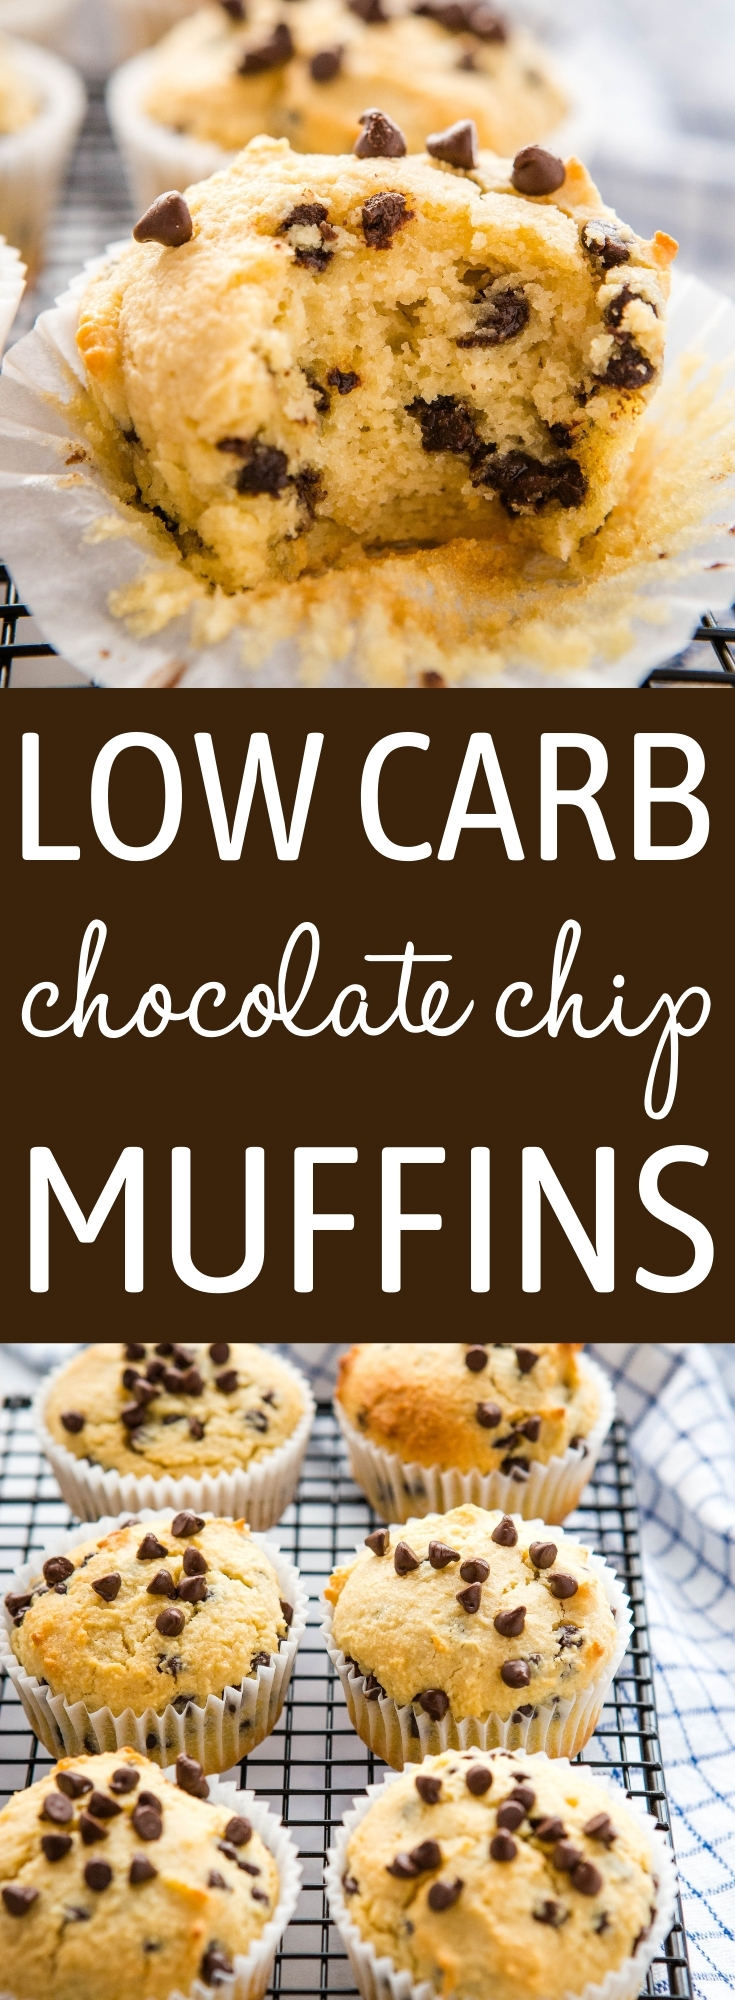 These Keto Muffins with Chocolate Chips are perfectly sweet and fluffy, with a classic muffin texture - gluten-free, sugar-free, and only 5 grams of net carbs per muffin! Recipe from thebusybaker.ca! #muffins #ketomuffins #keto #lowcarb #sugarfree #glutenfree #healthymuffins via @busybakerblog